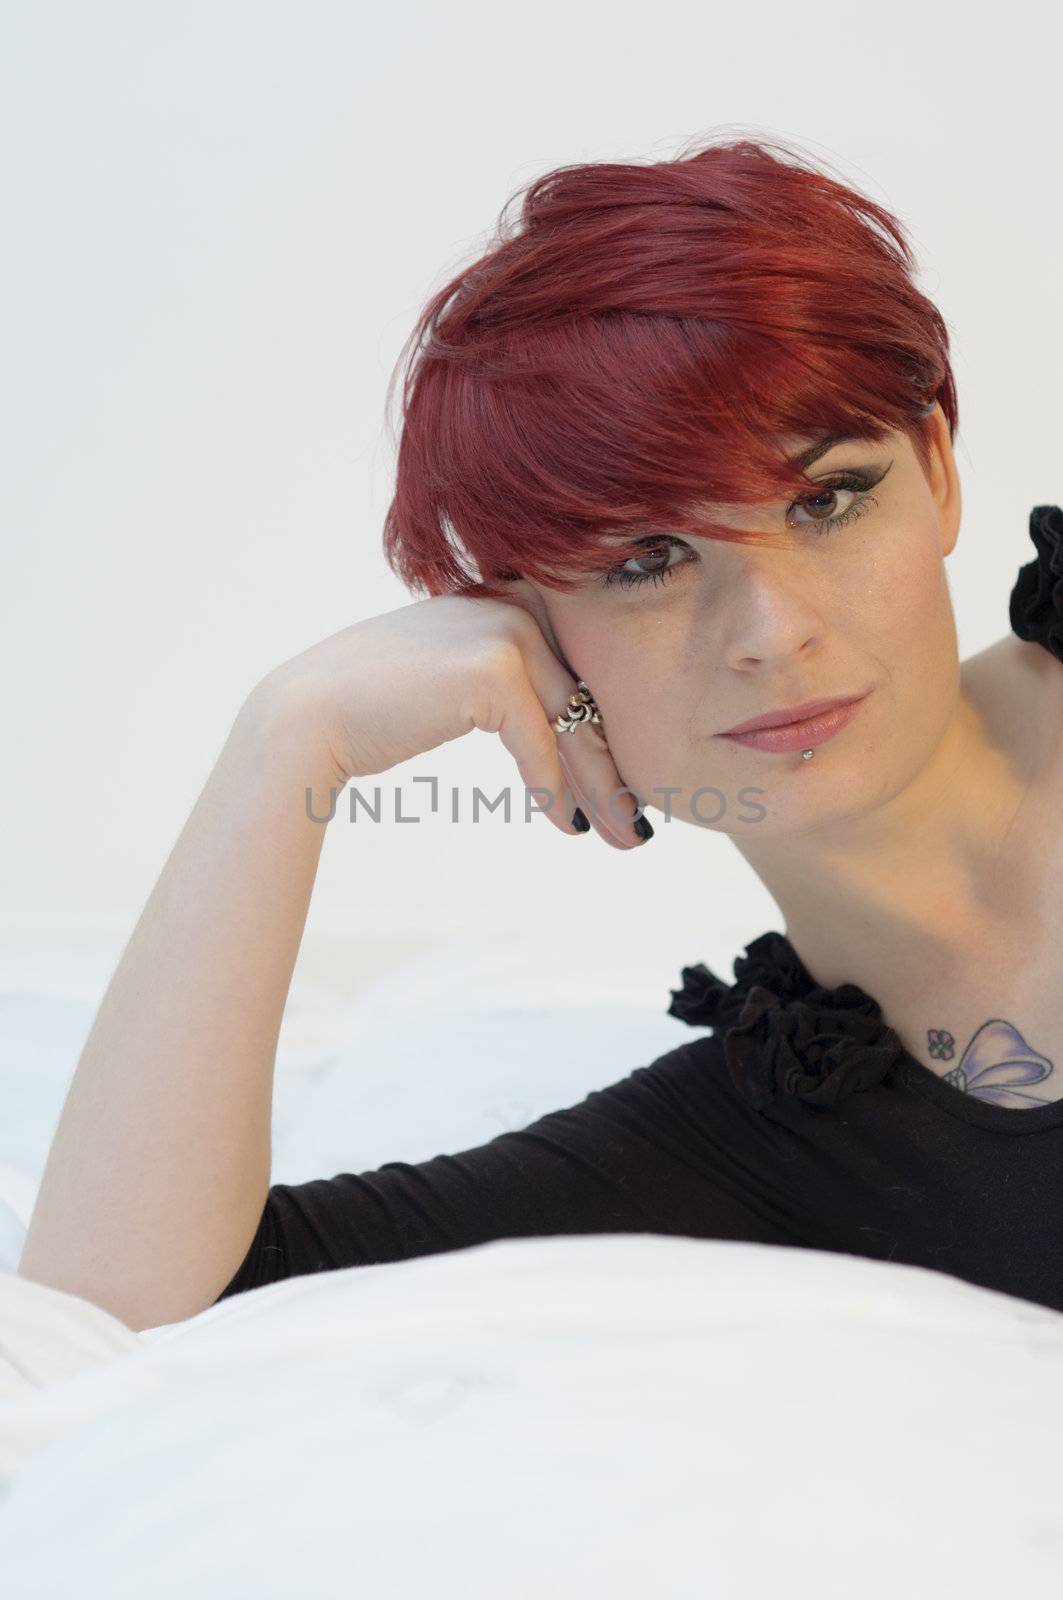 Portrait of a girl with red hair, piercing on lower lip, and tattoos on chest and shoulders, on quilt and serious expression.